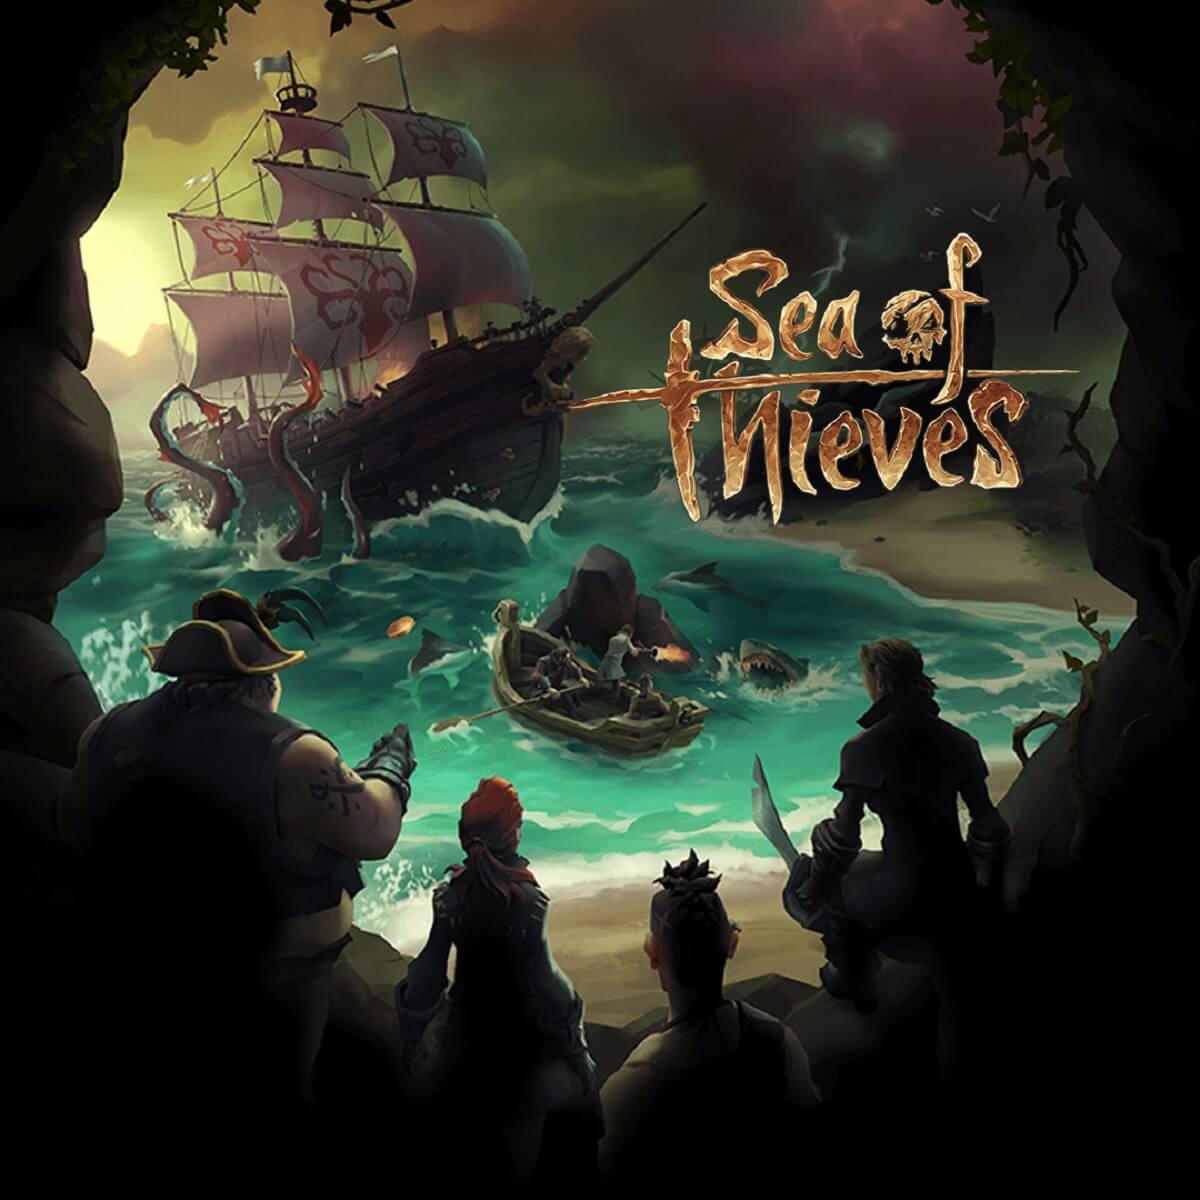 The Pirate Code  The Sea of Thieves Wiki